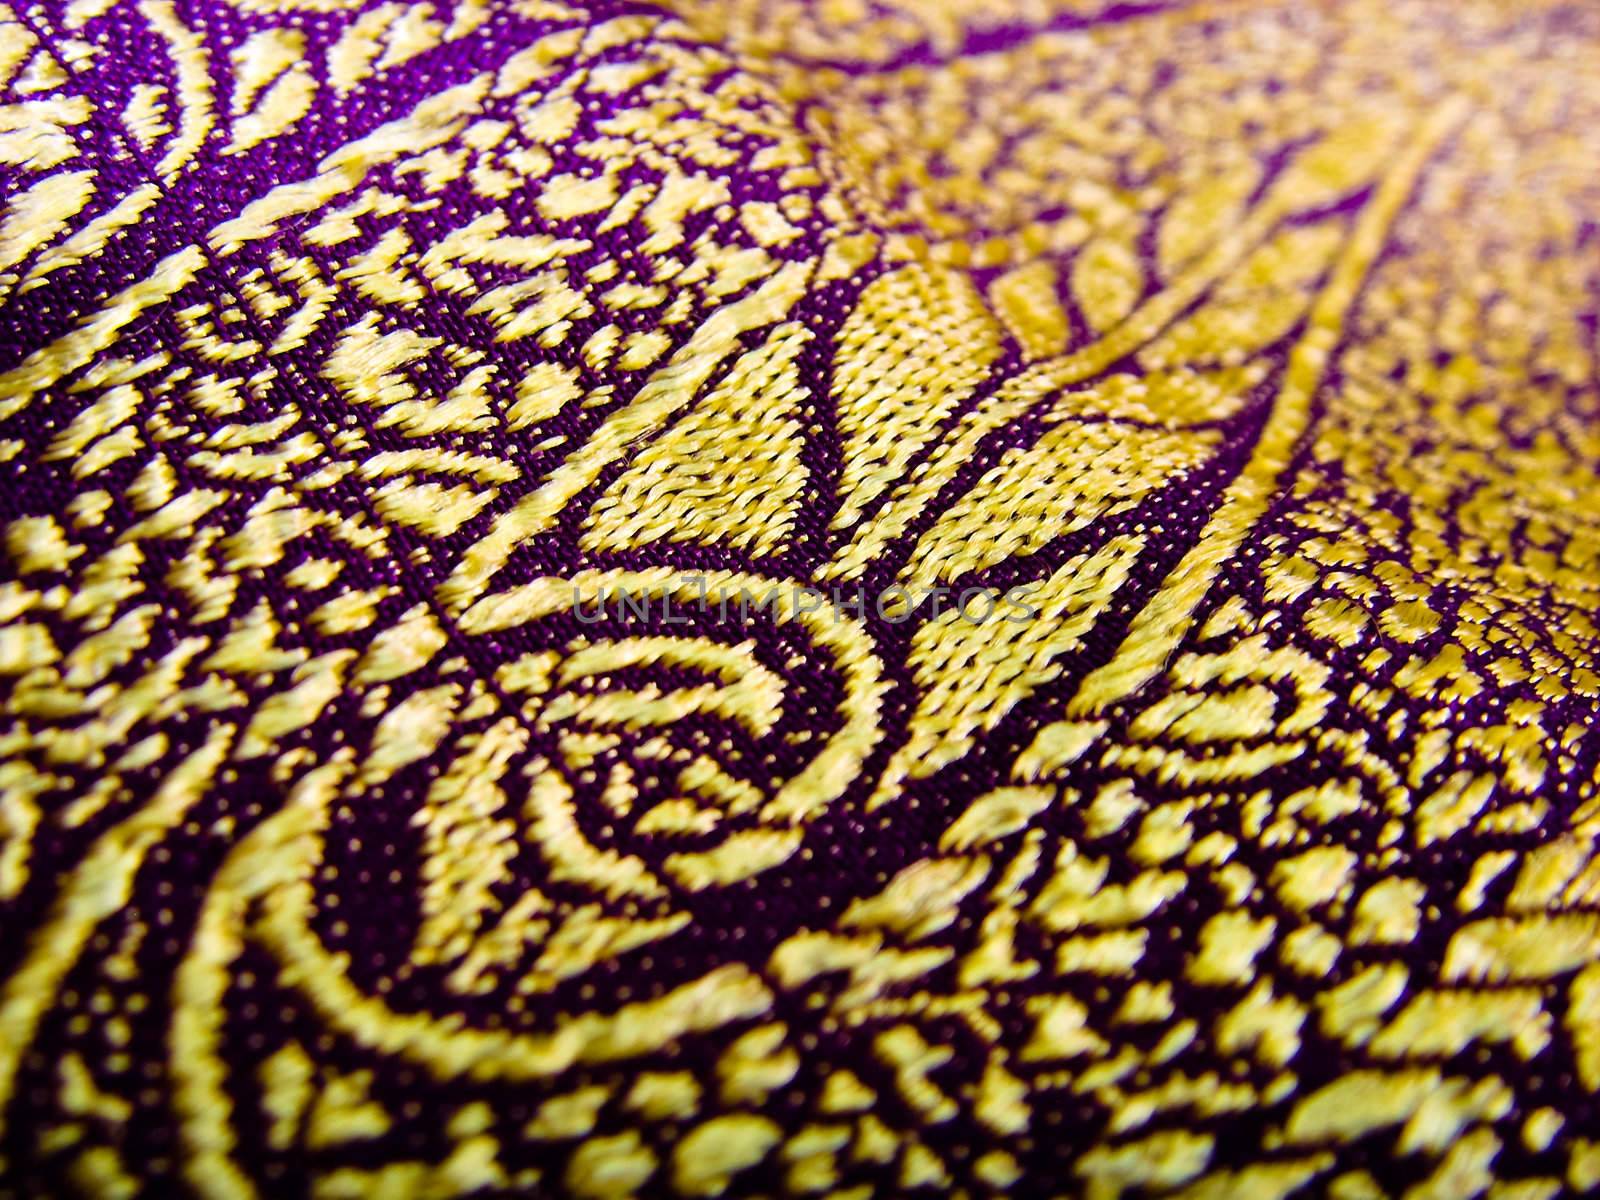 Floral design on fabric by alvingb